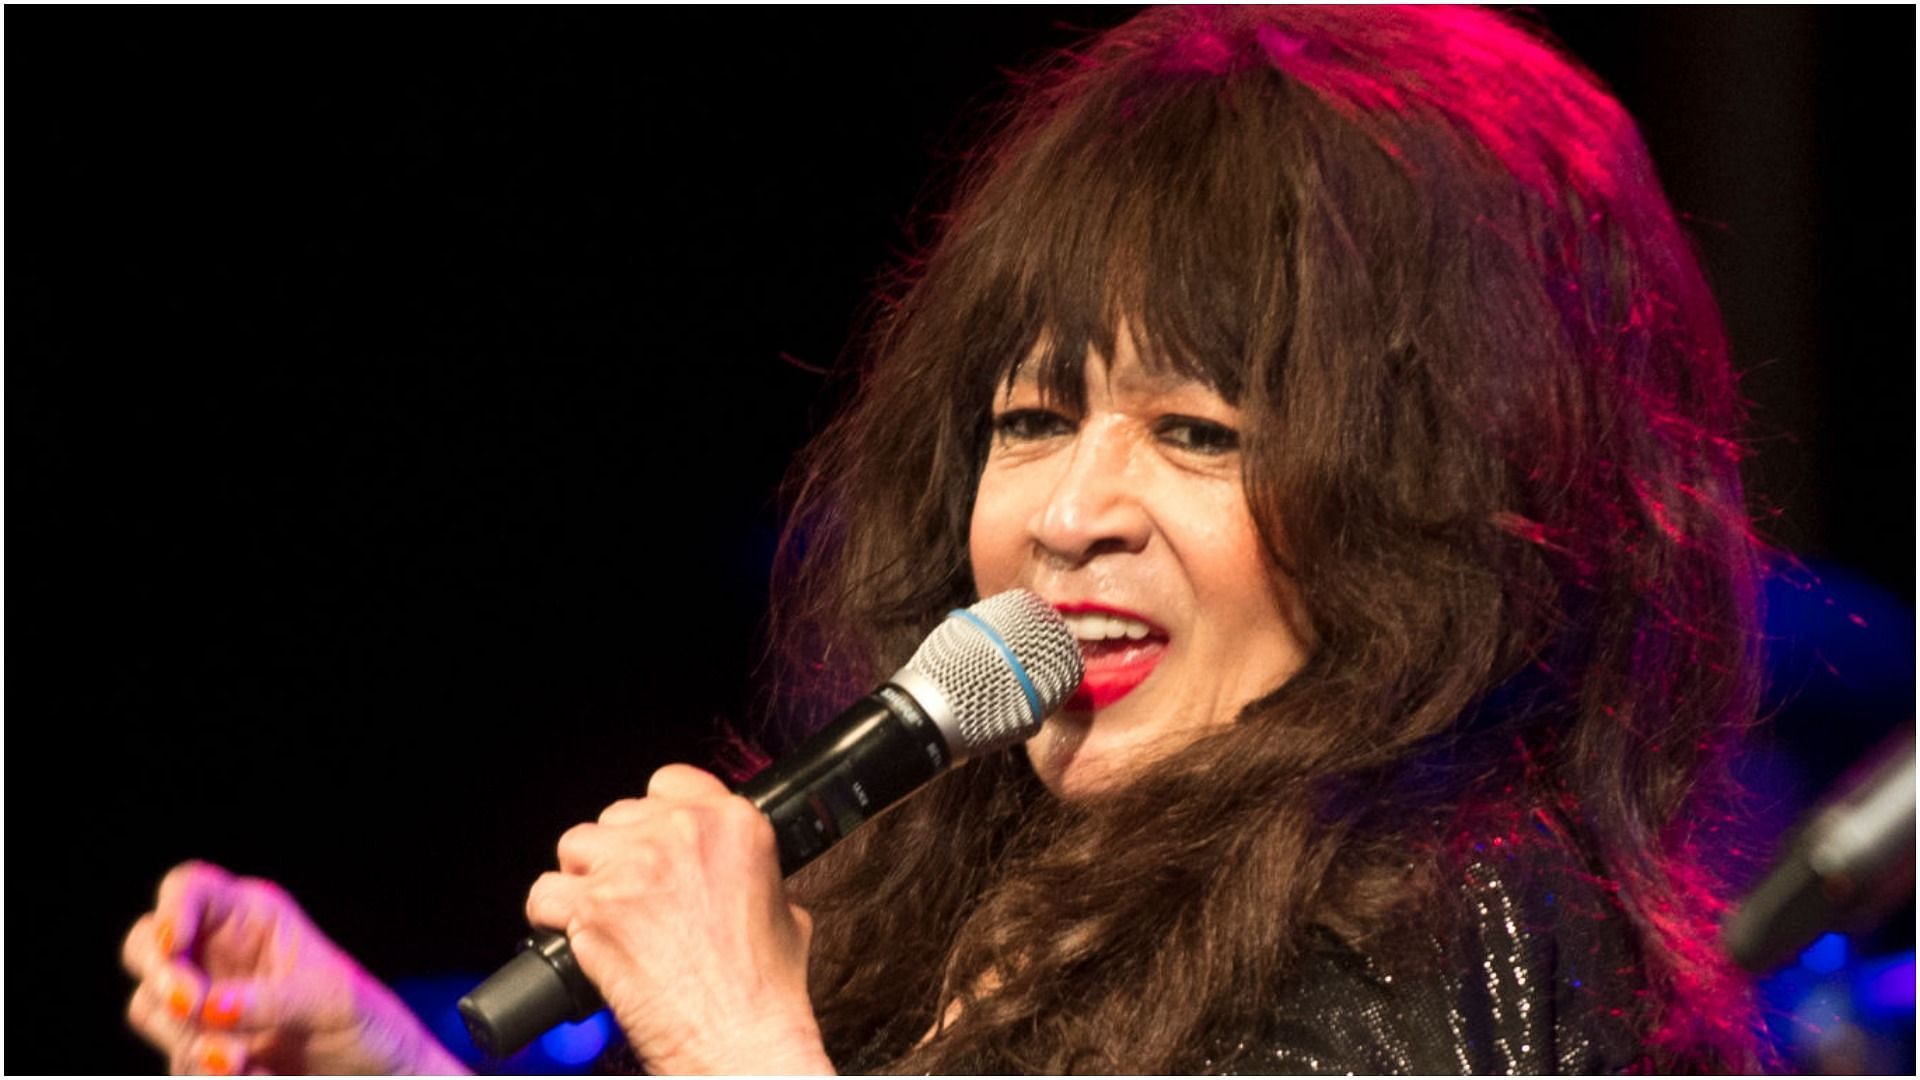 Ronnie Spector recently died at the age of 78 (Image via Jordi Vidal/Getty Images)